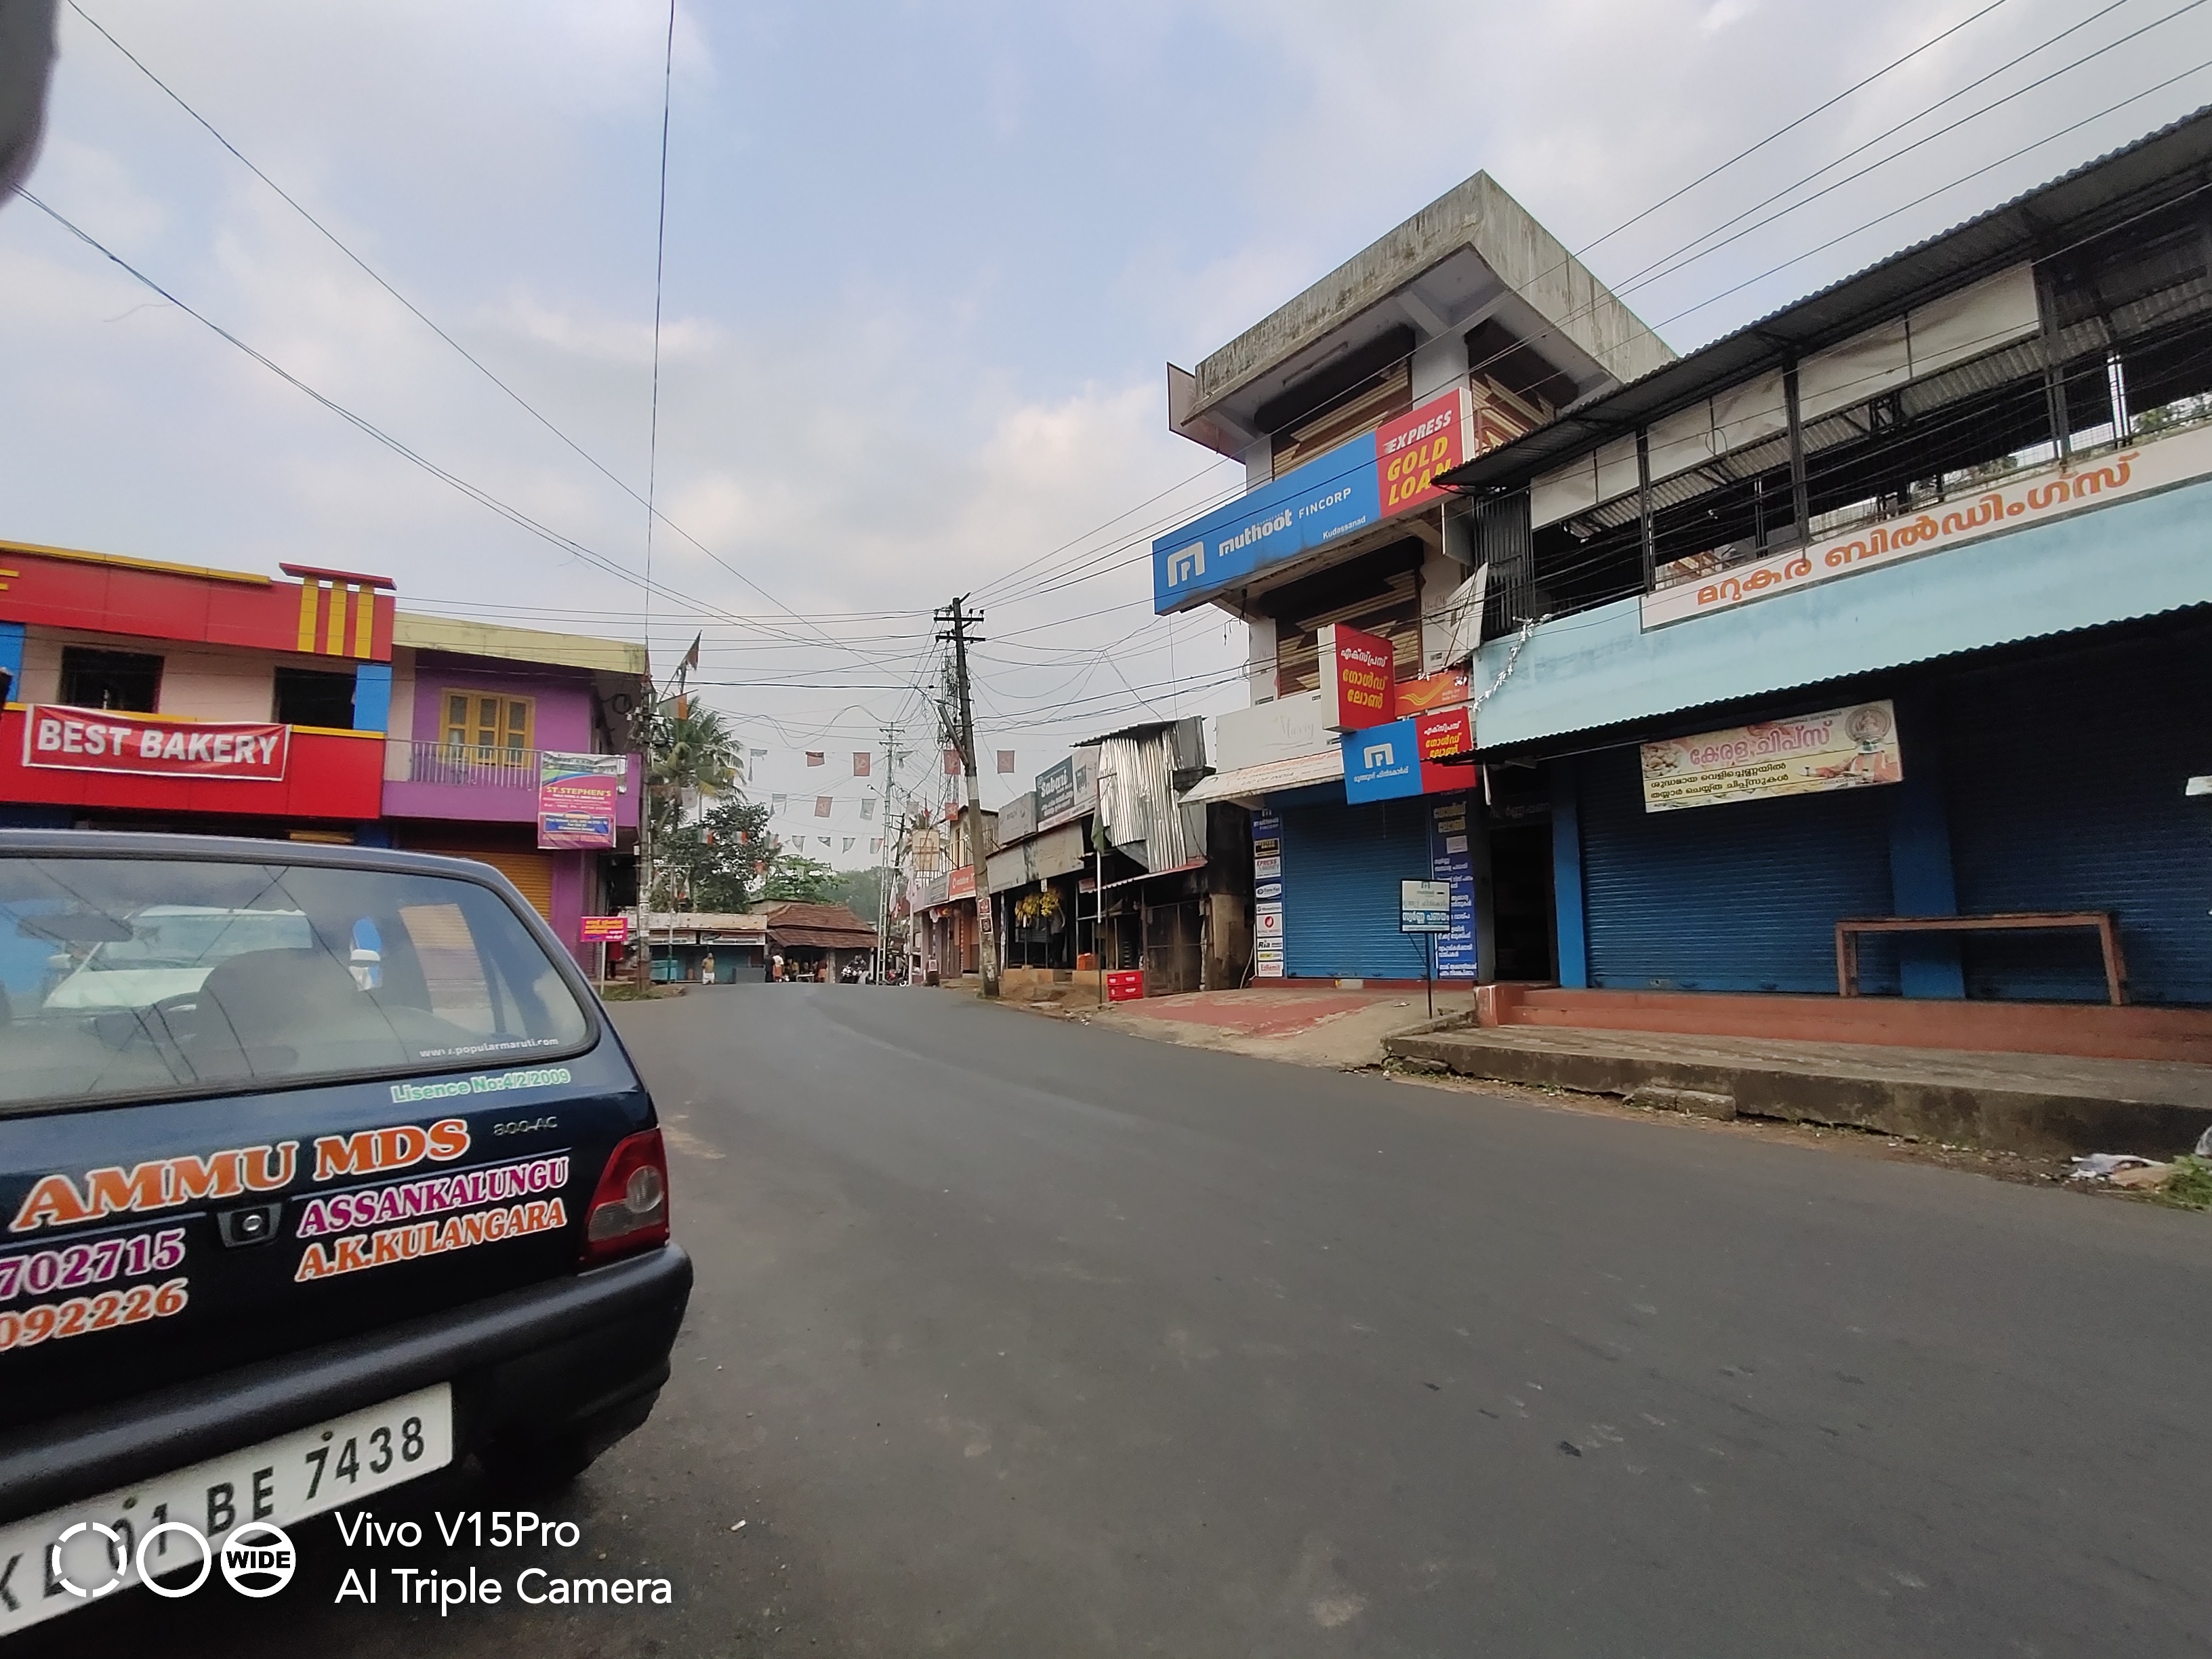 Photos and Videos of Muthoot Fincorp Gold Loan in Kudassanad, Alappuzha